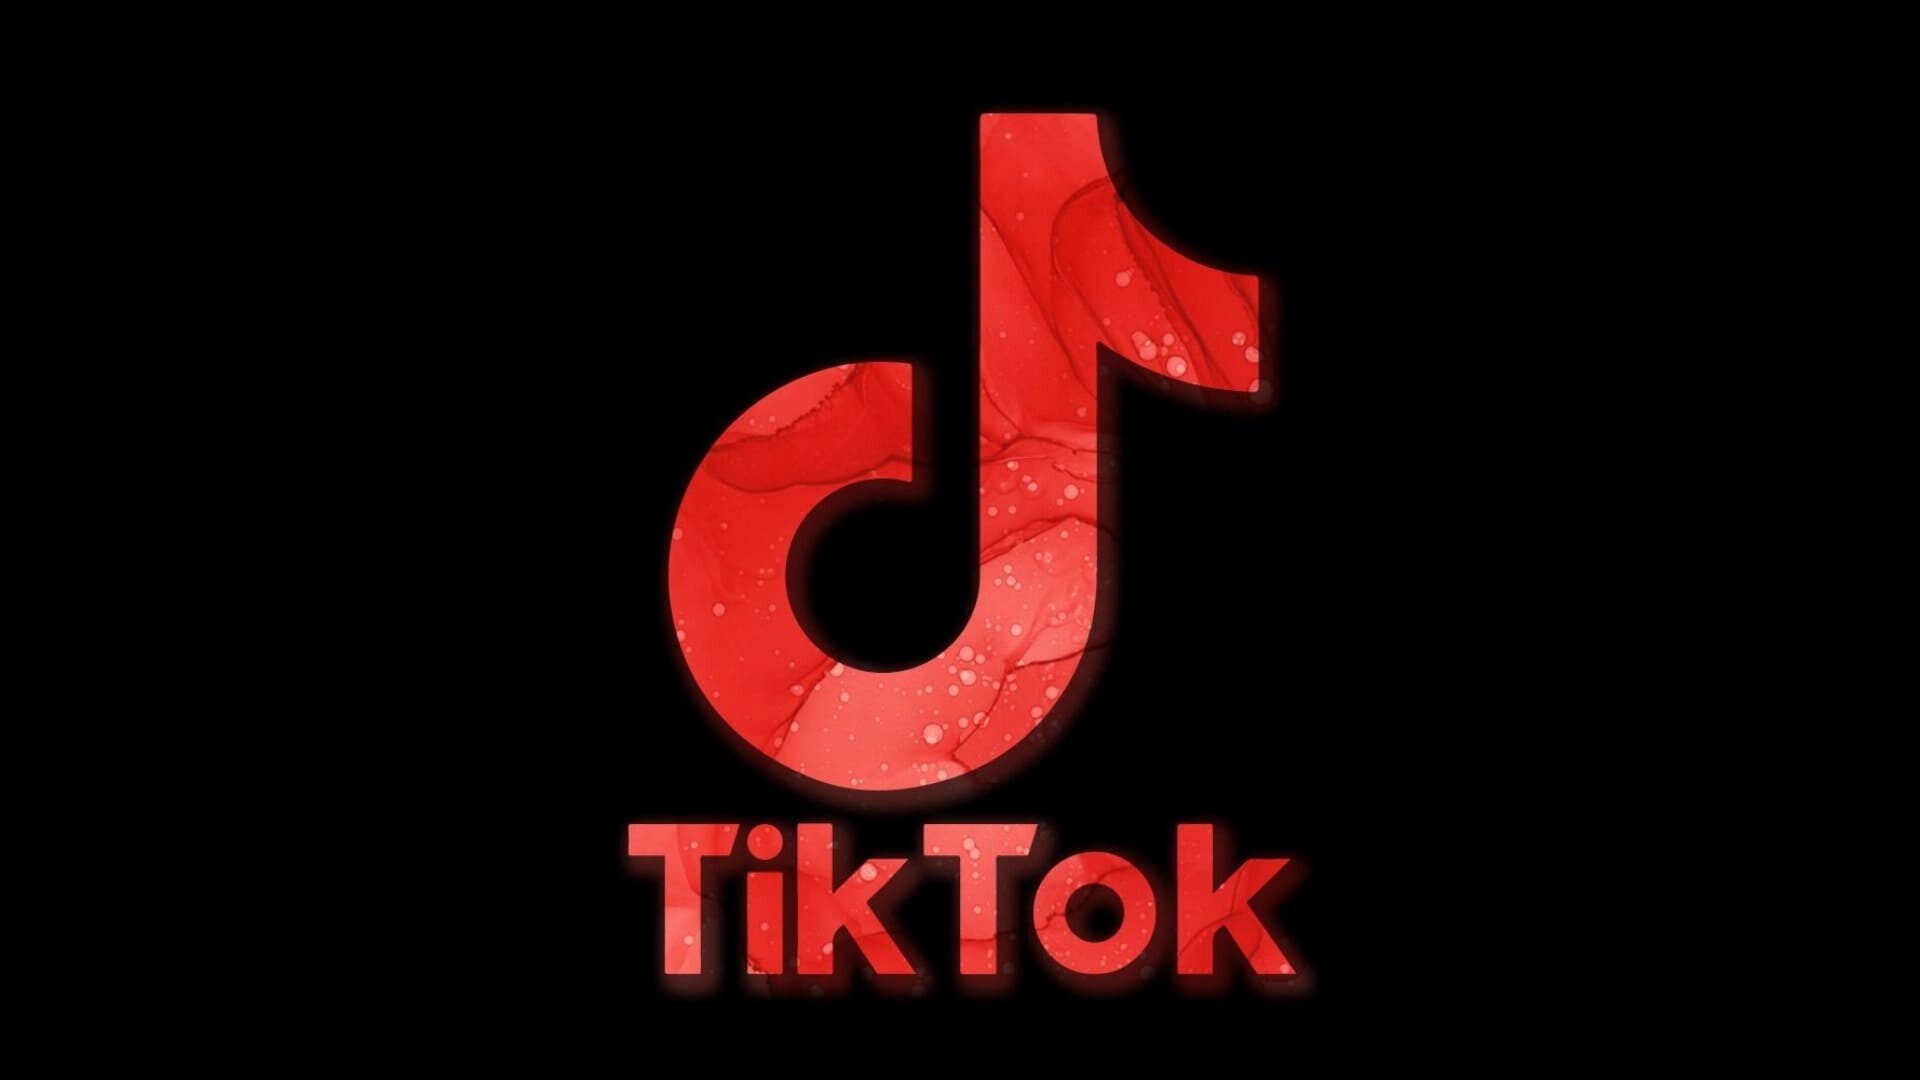 TikTok: Sharing platform, Launched by Chinese-owned company ByteDance. 1920x1080 Full HD Background.